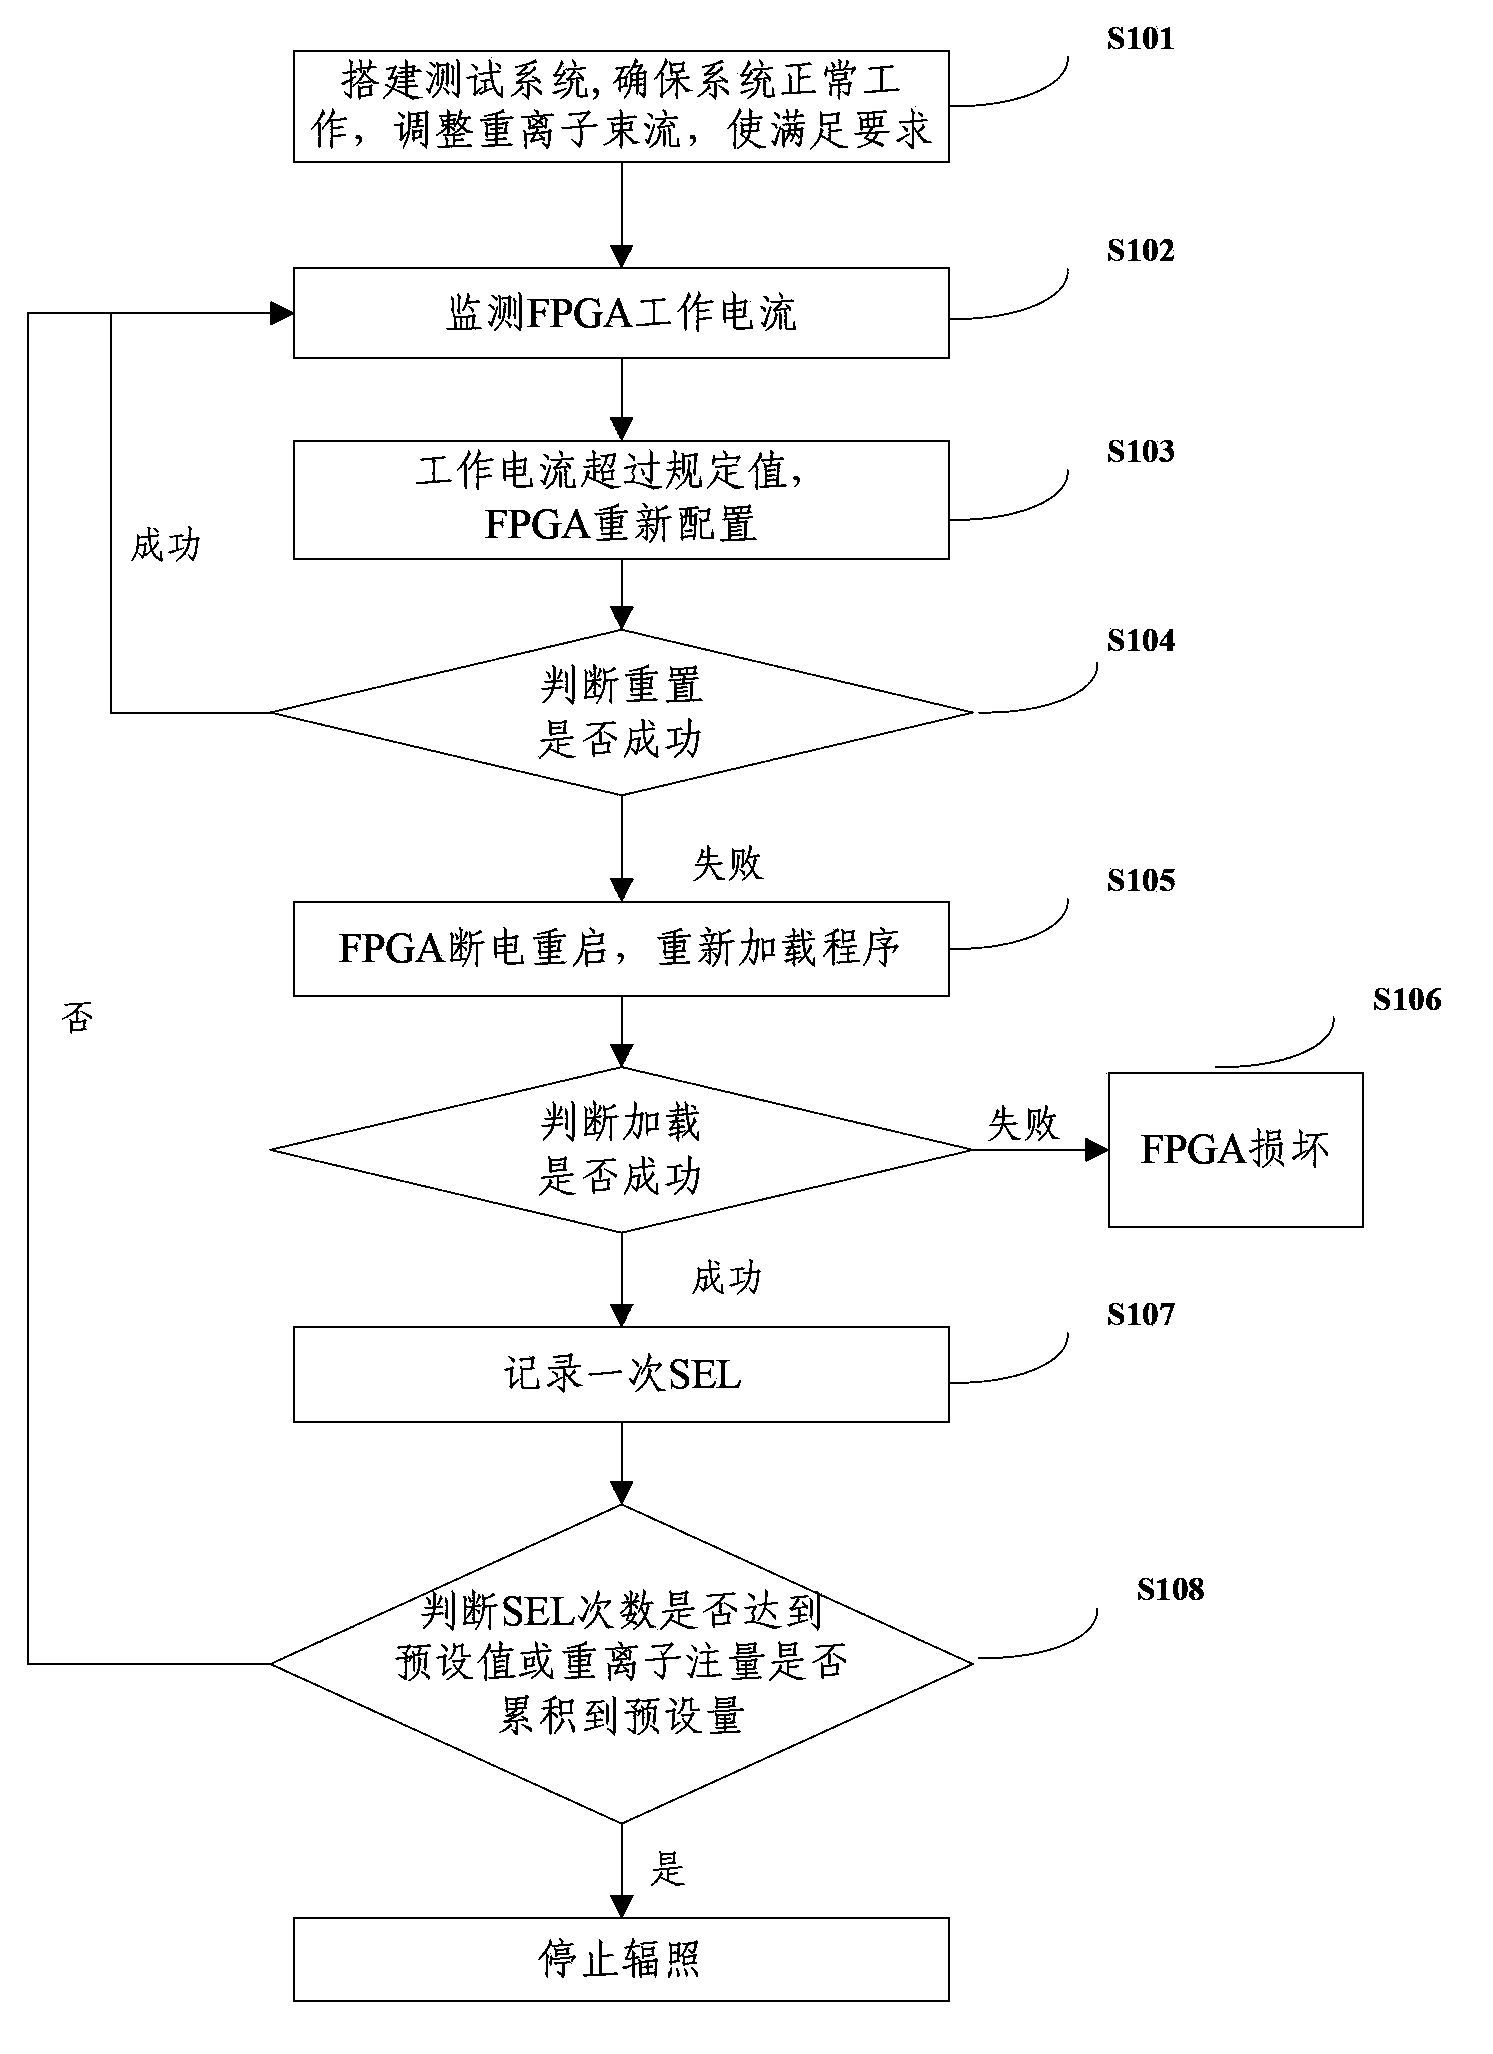 Single particle latch monitoring method and apparatus of FPGA